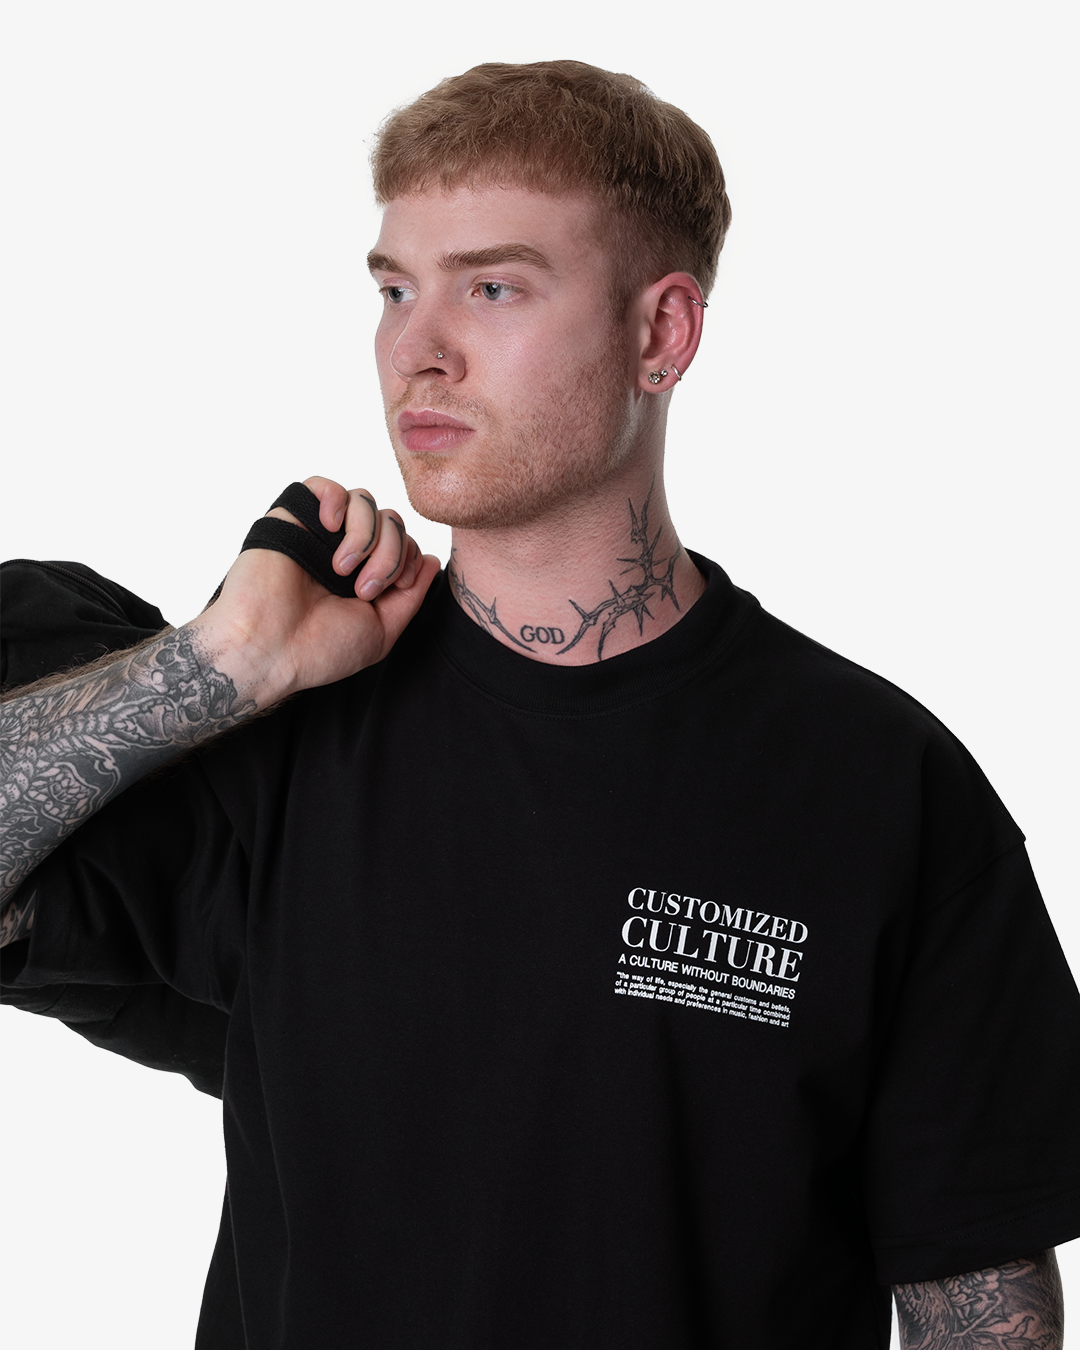 Customized Culture black techno outfit t-shirt